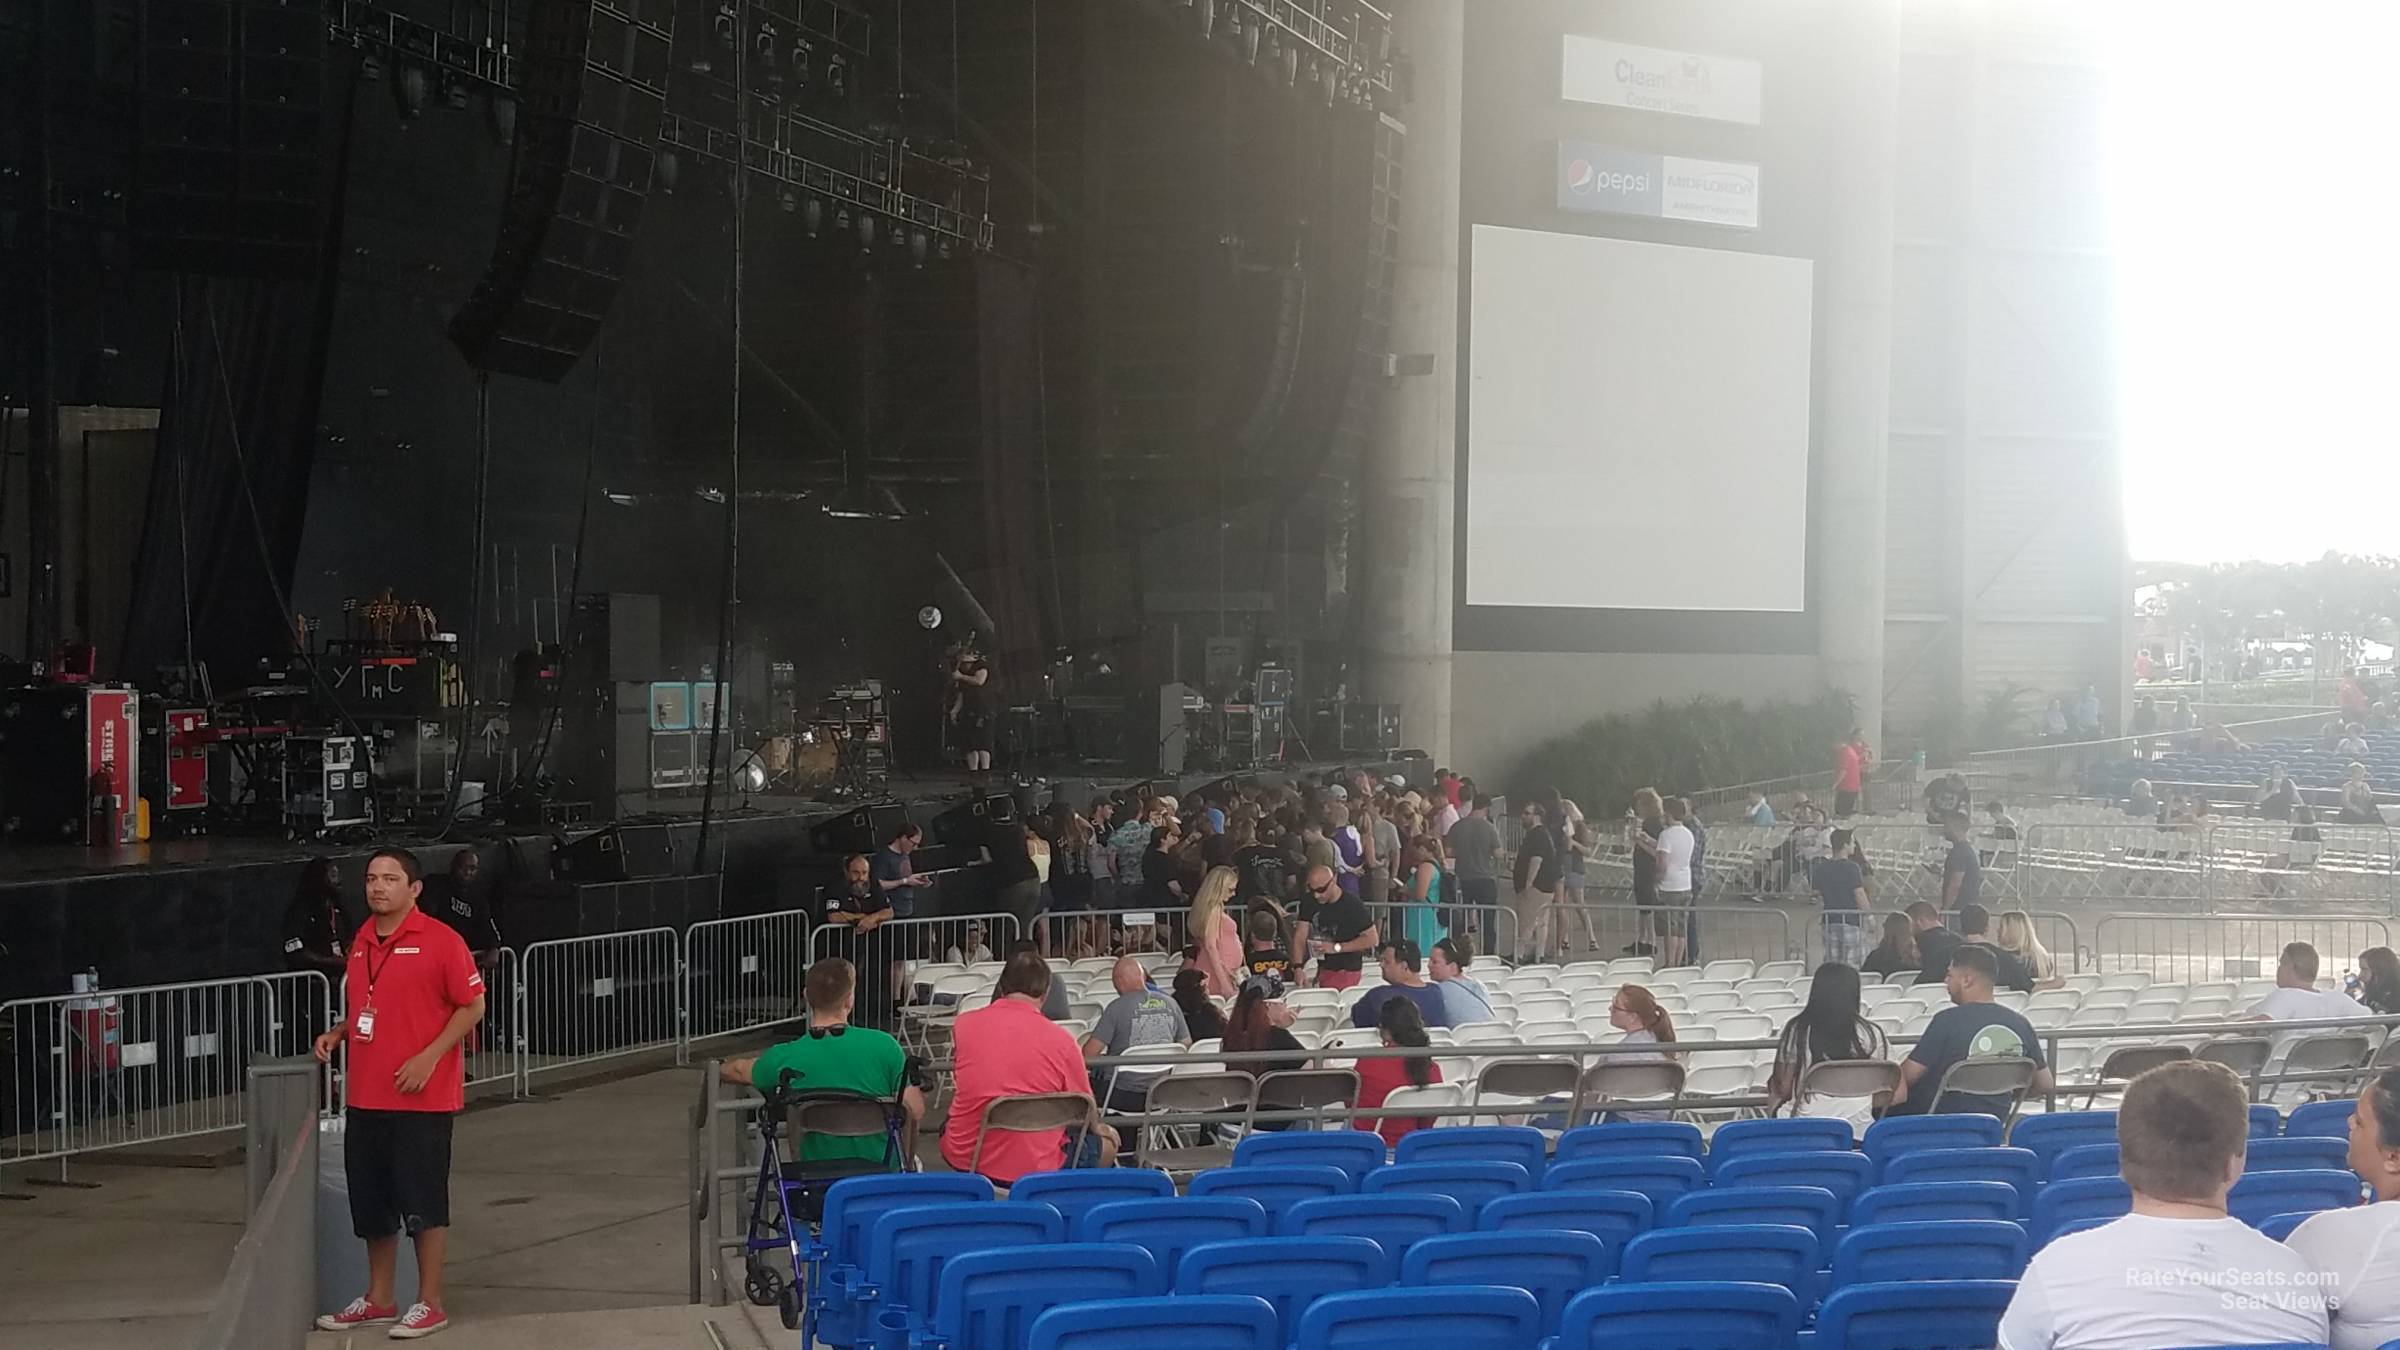 Midflorida Credit Union Amphitheatre Seating Chart With Seat Numbers